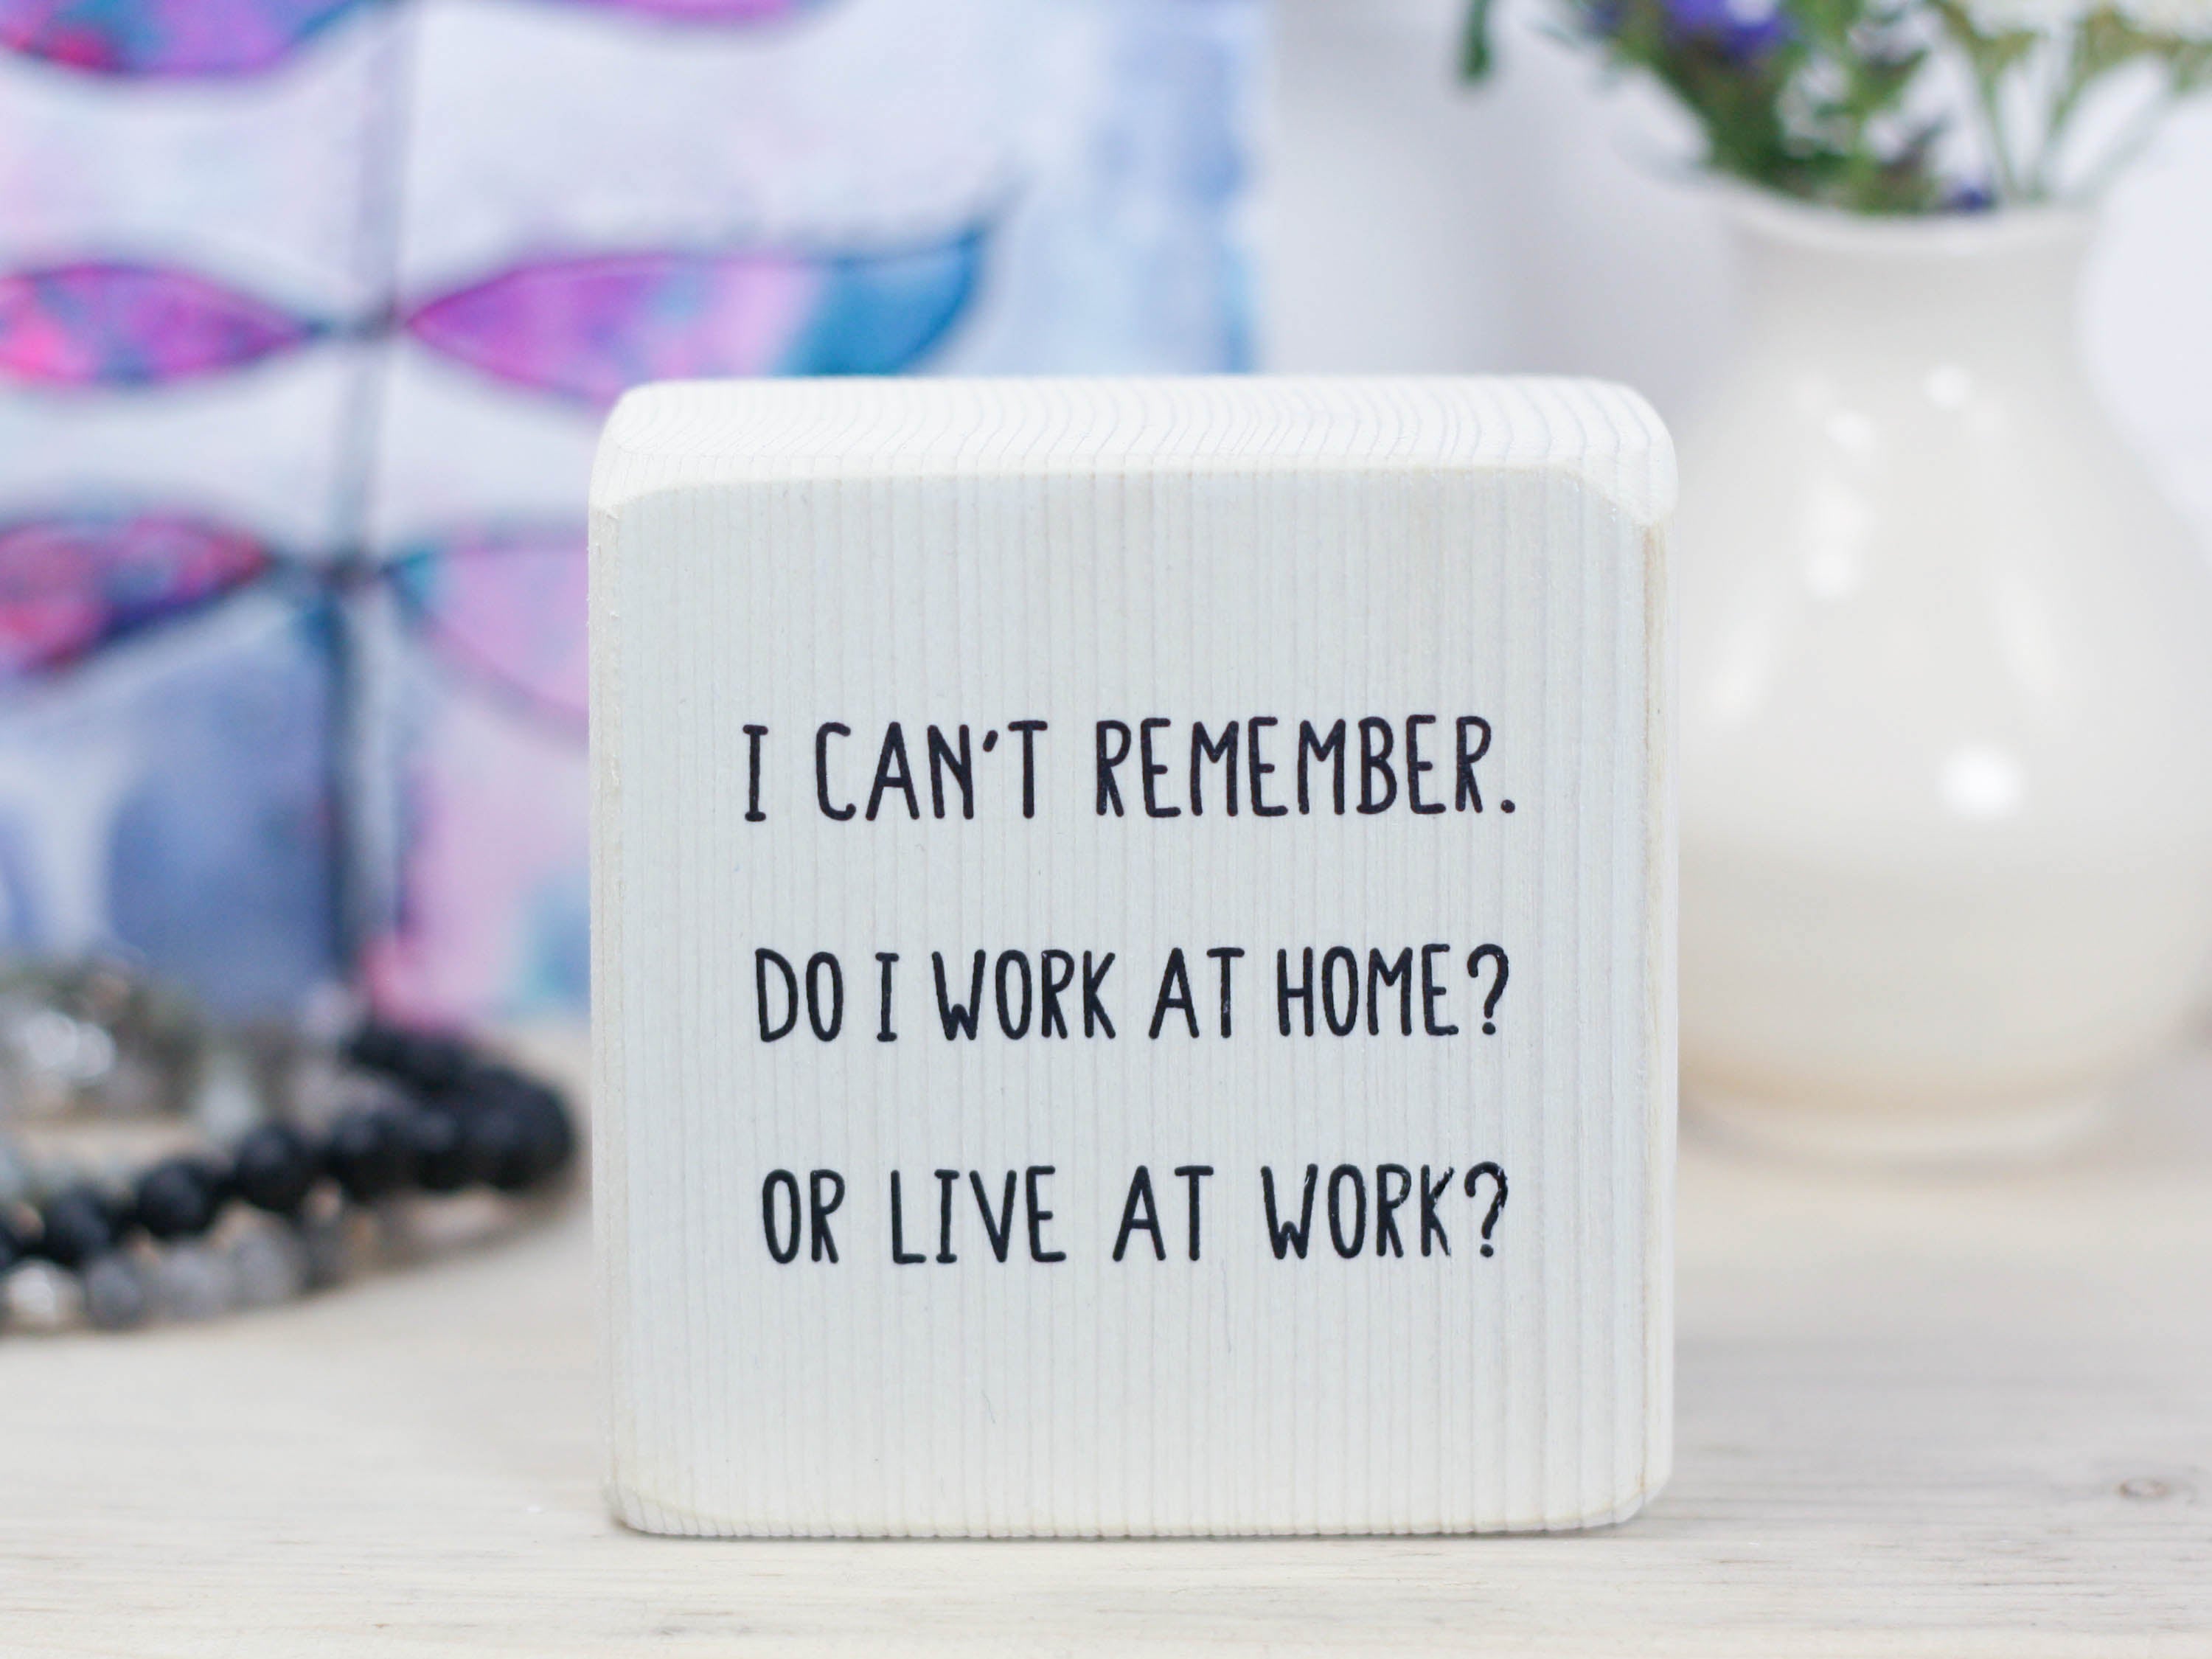 Small, freestanding whitewash wood sign with a funny saying on it "I can't remember. Do I work at home? Or live at work?"